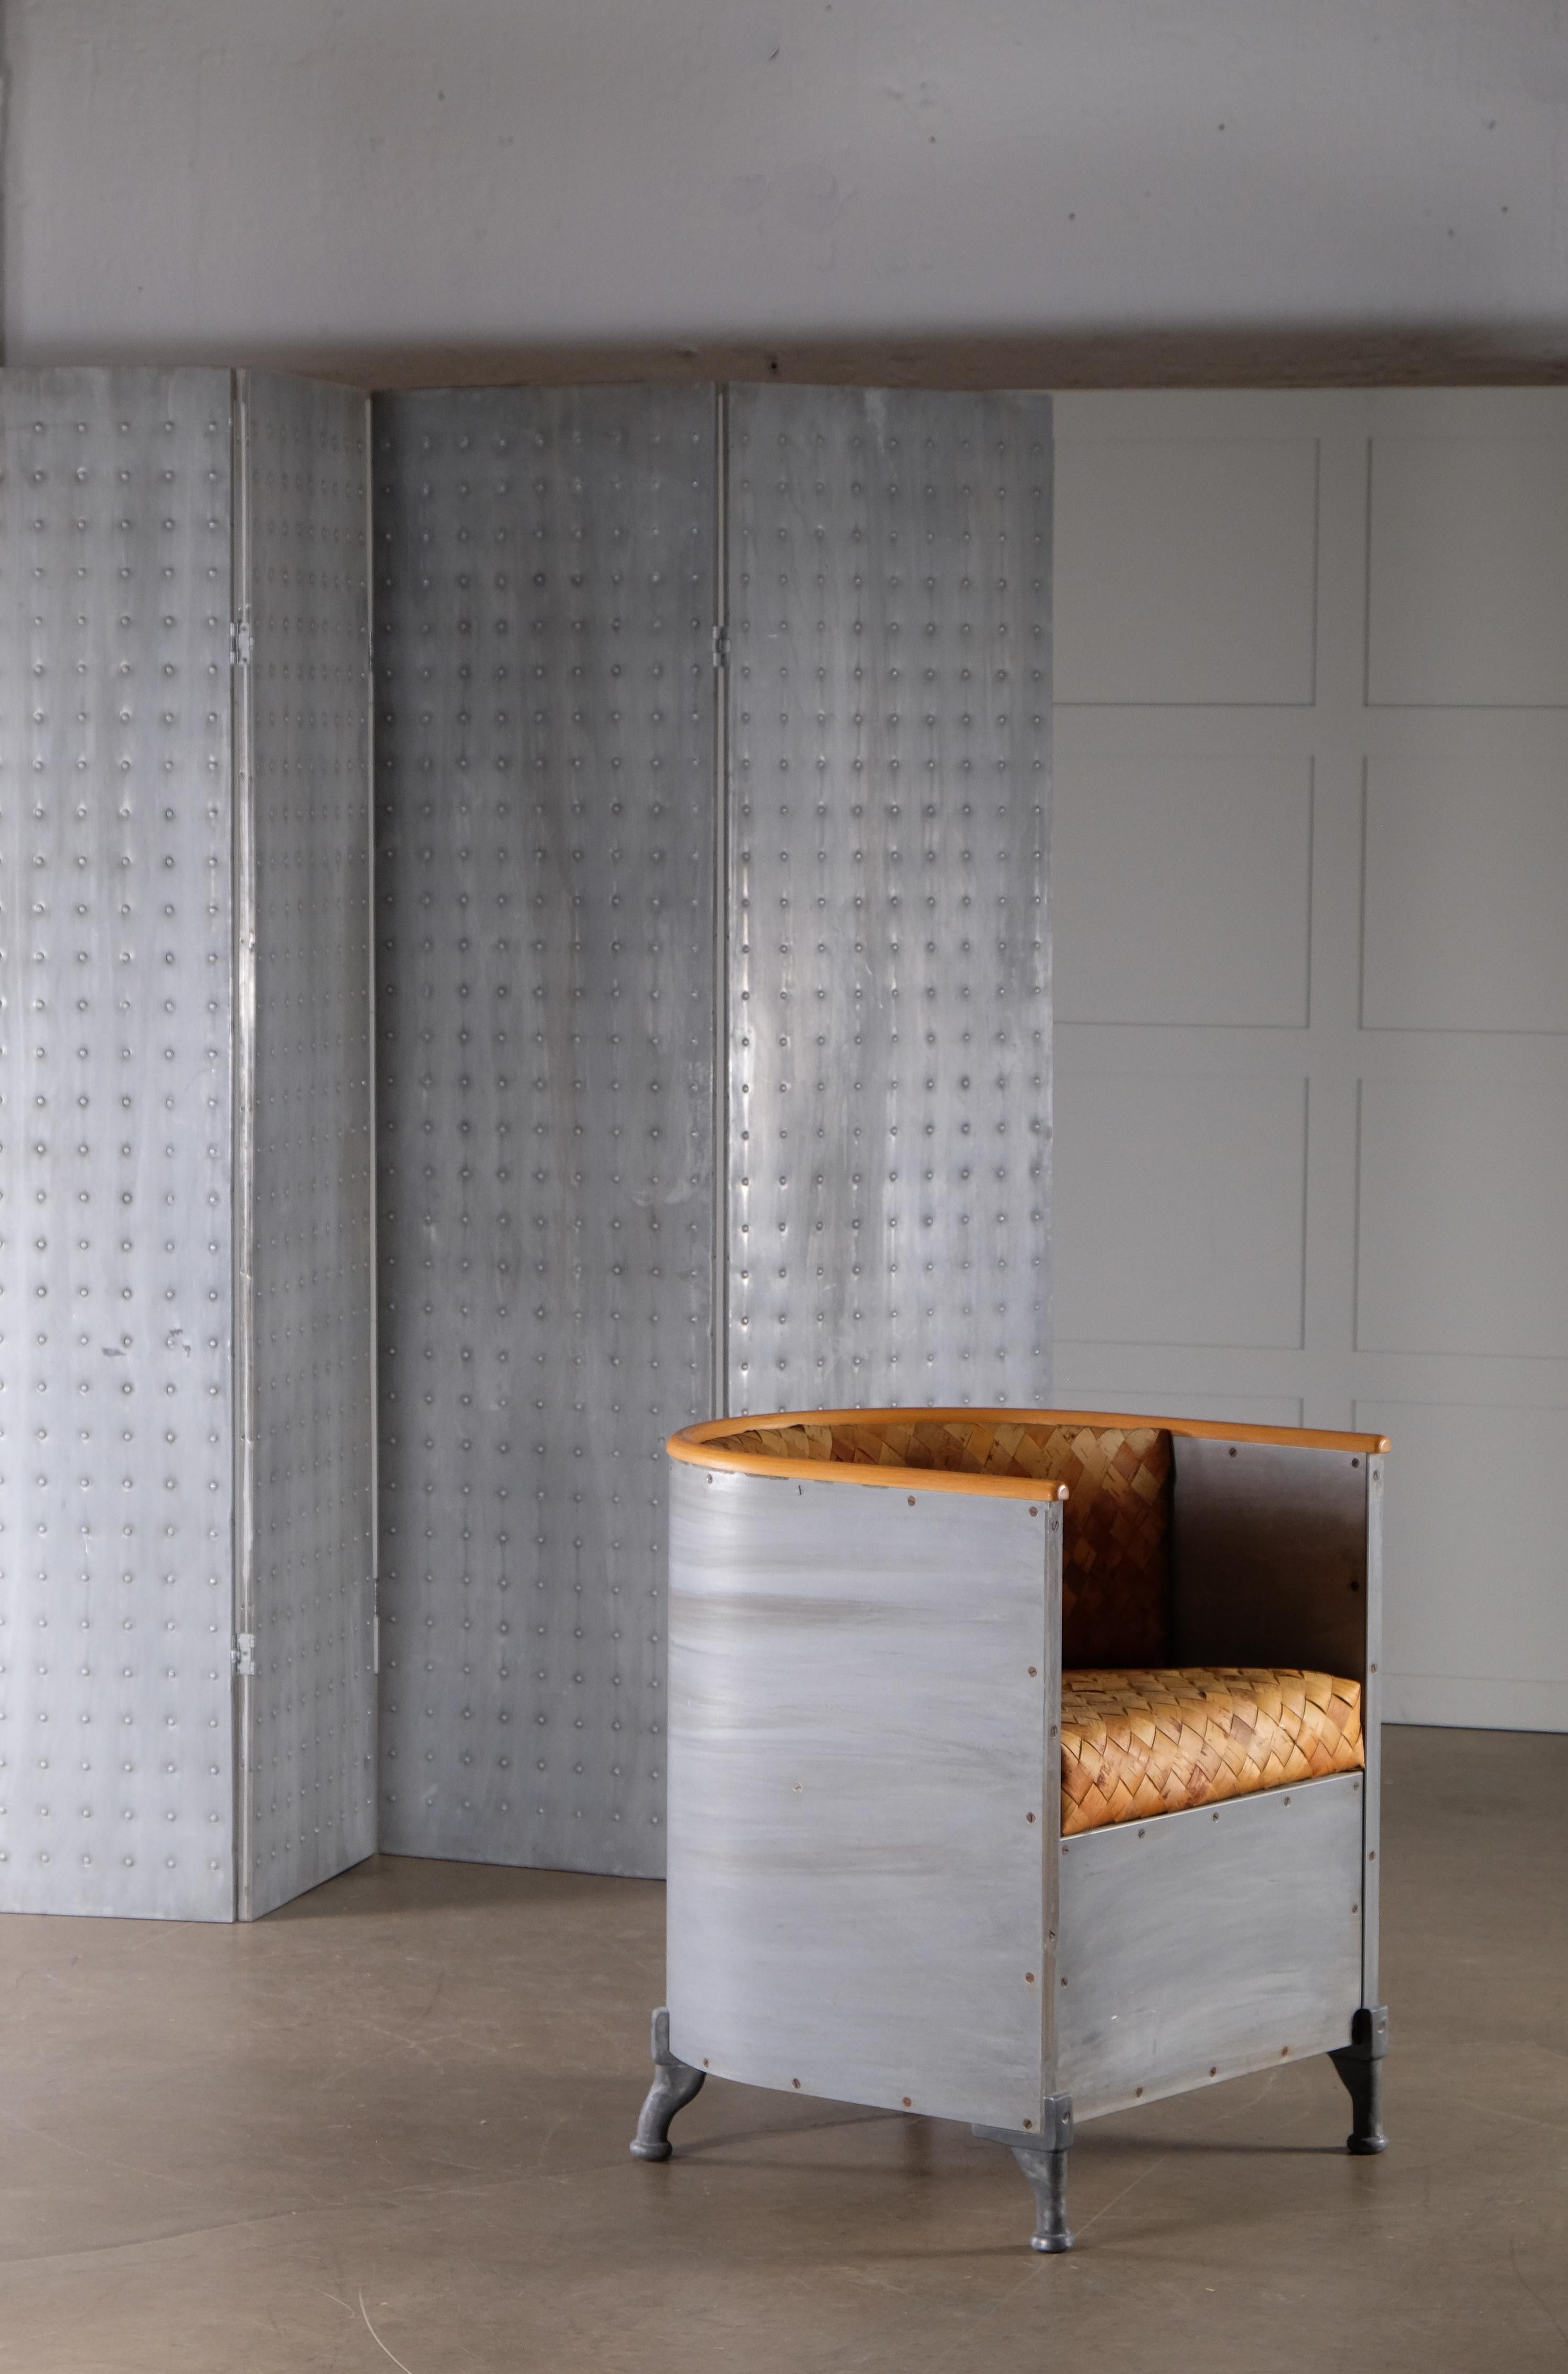 Rare folding screen / room divider ‘Rörligt objekt’ by Mats Theselius, early 1990s.
Aluminum with dot decoration in relief. Folds into four parts: 4 x 48 cm, height 188 cm.